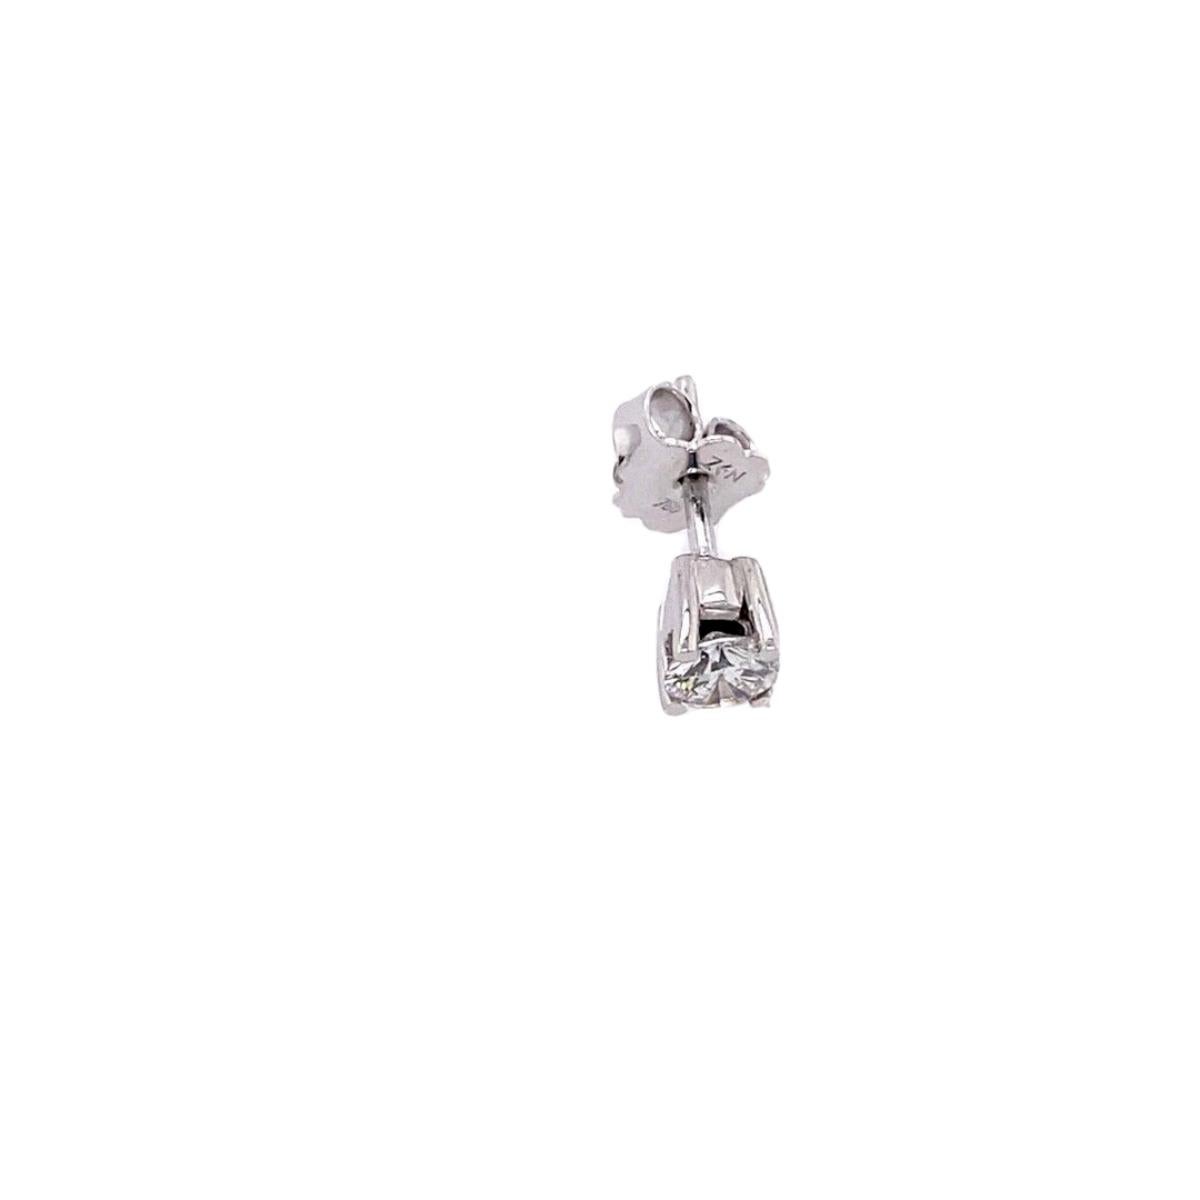 0.35ct F/VS1 Round Brilliant Cut Single Diamond Stud Earring, In 18ct White Gold

Simple and elegant design single stud earring, set with 0.35ct F/VS1 round brilliant cut diamond, In 18ct white gold, with peg and screw fittings.

Additional